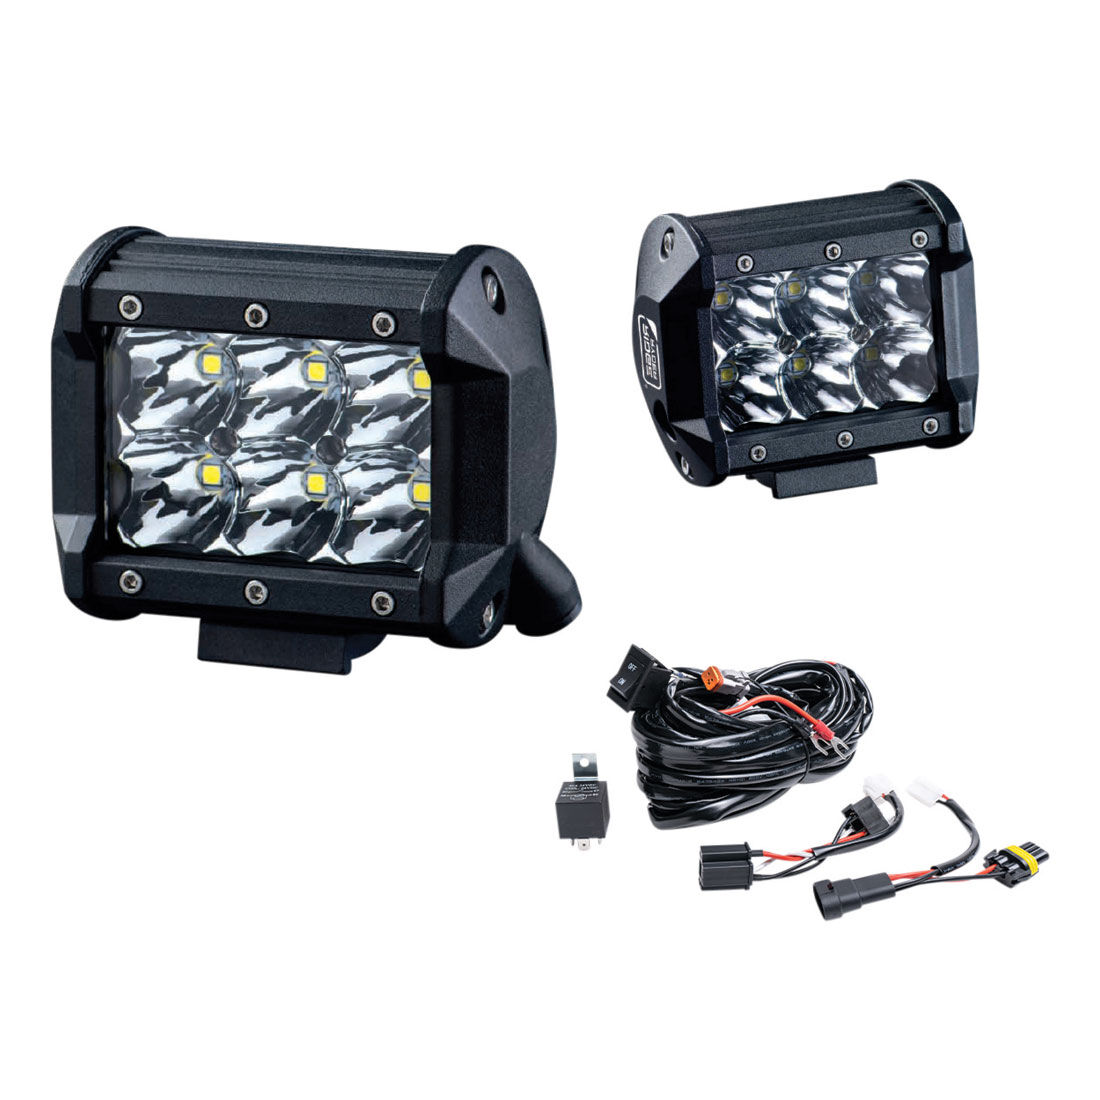 Ridge Ryder 100mm Led Driving Lights 25w With Harness Ebay